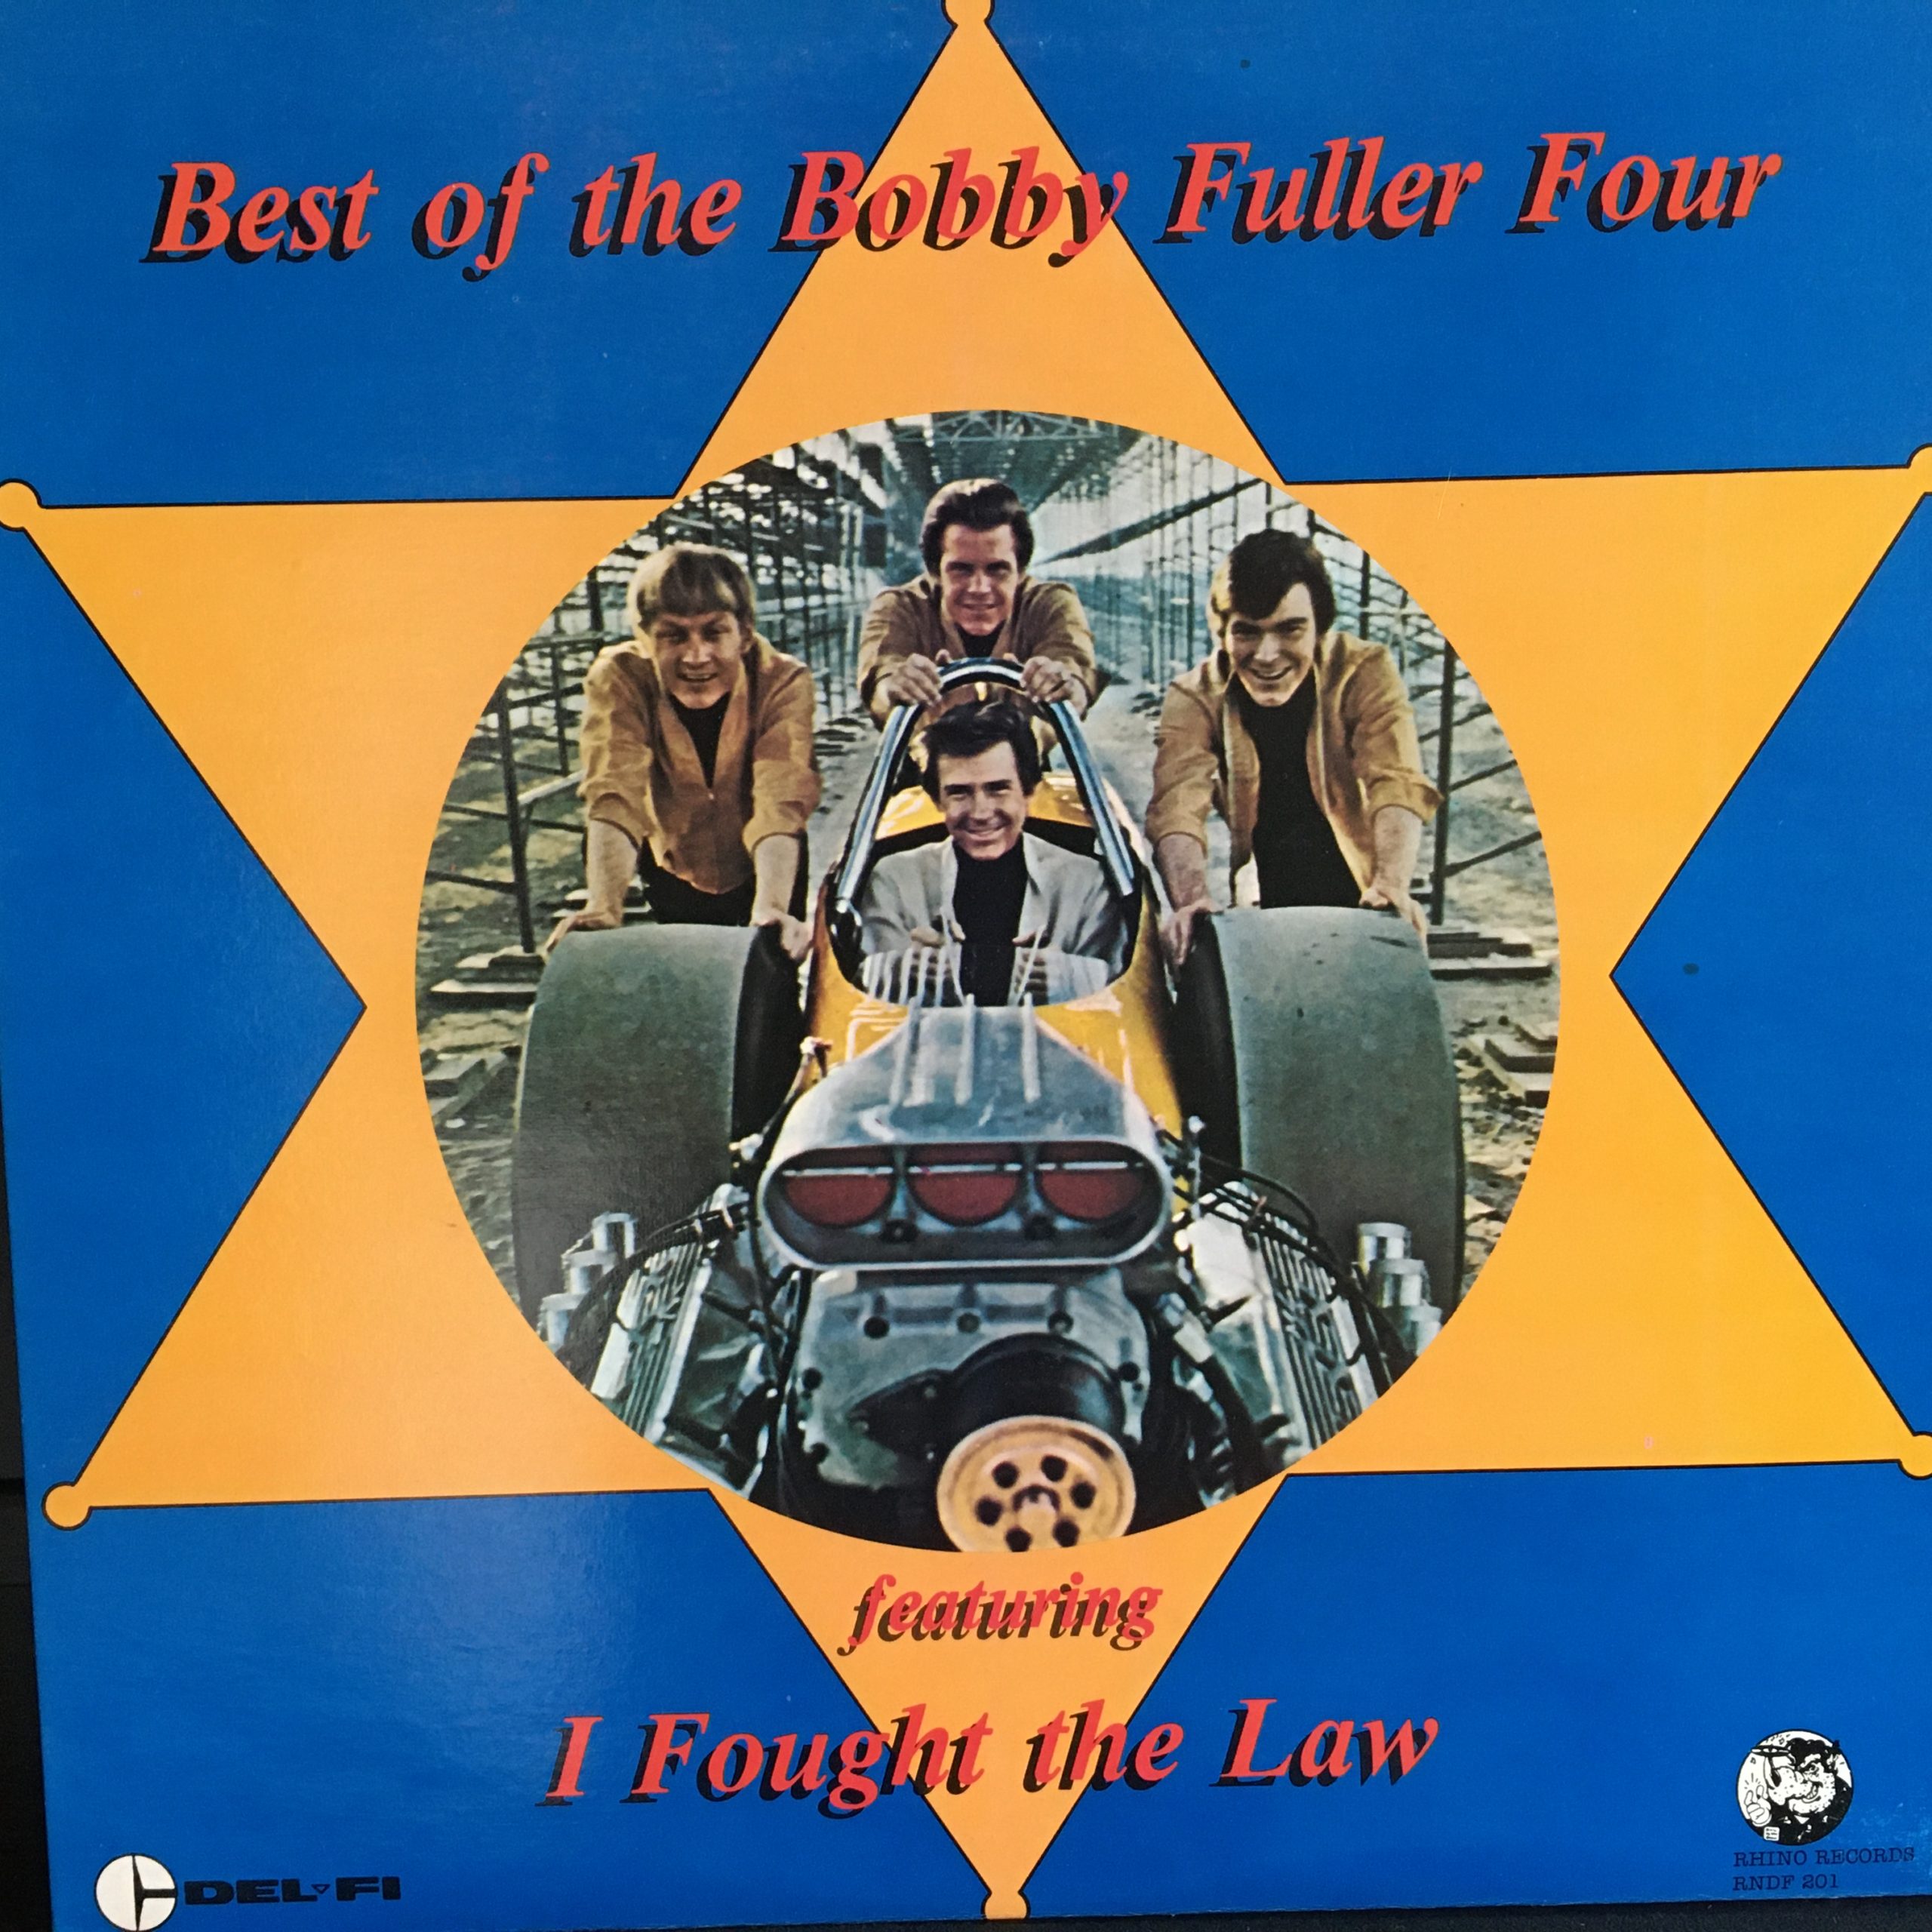 Best of the Bobby Fuller Four front cover